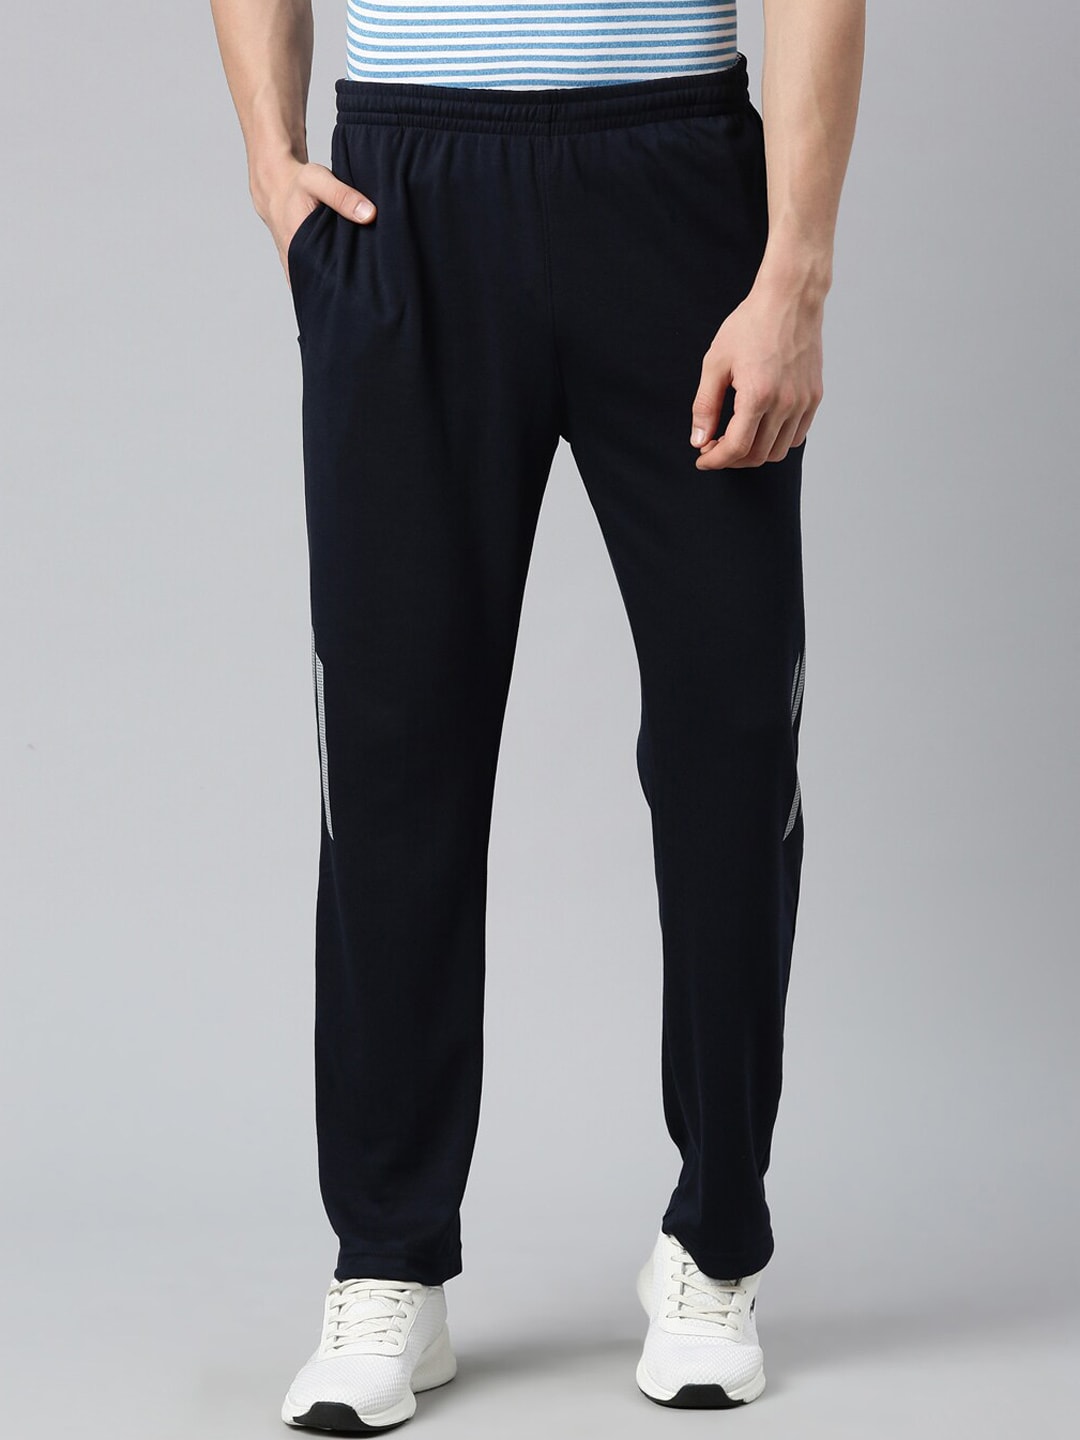 Pure Cotton Mens Track Pants - Buy Pure Cotton Mens Track Pants Online at  Best Prices In India | Flipkart.com